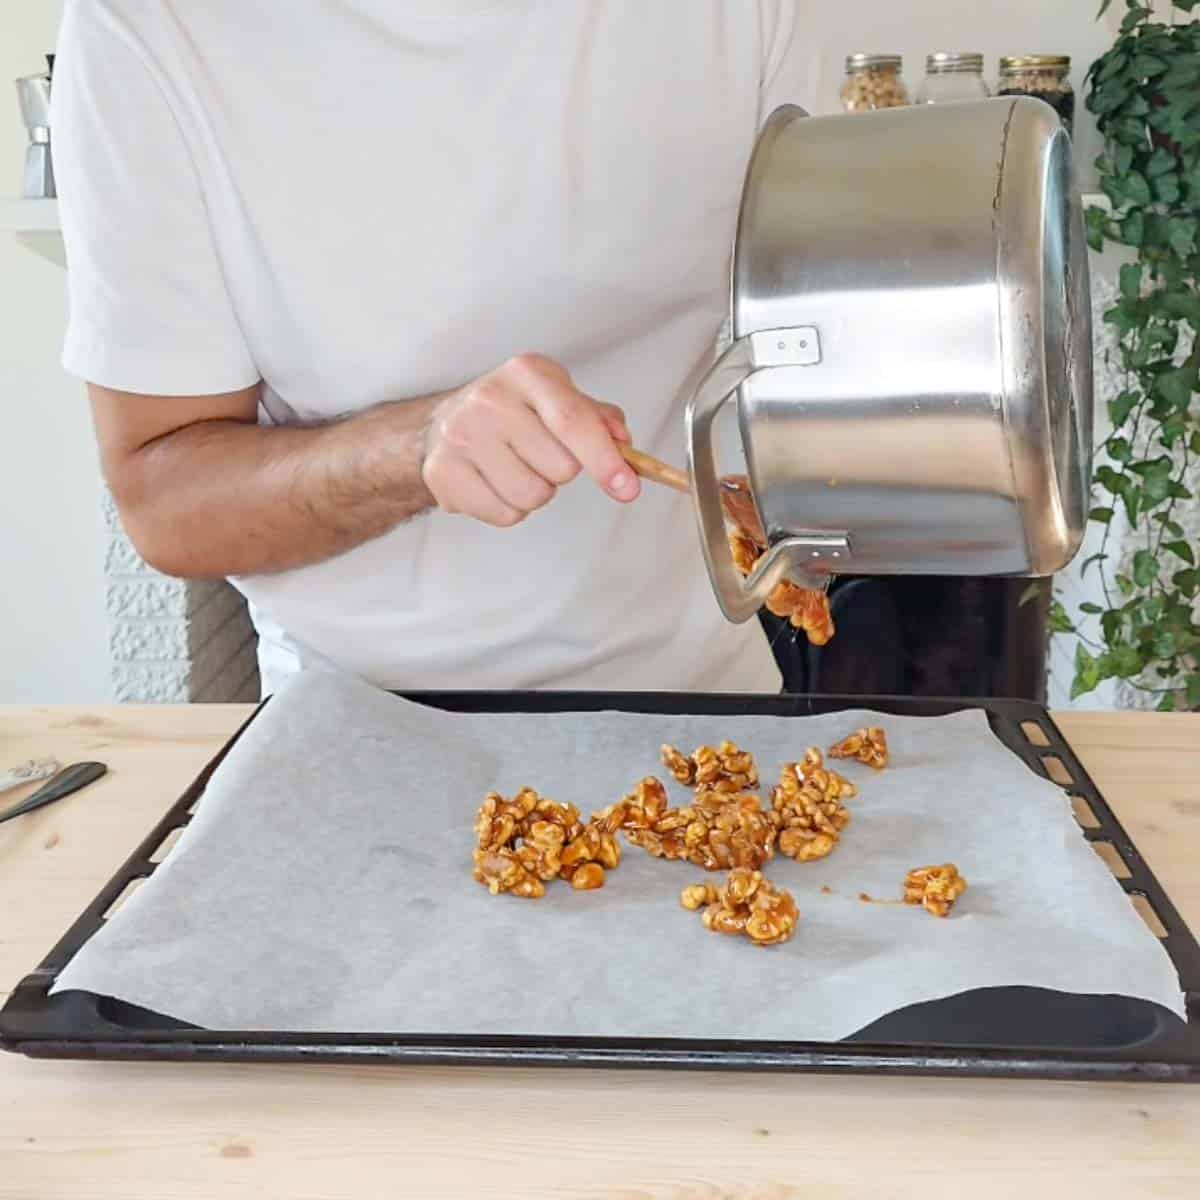 transferring candied walnuts onto parchment paper